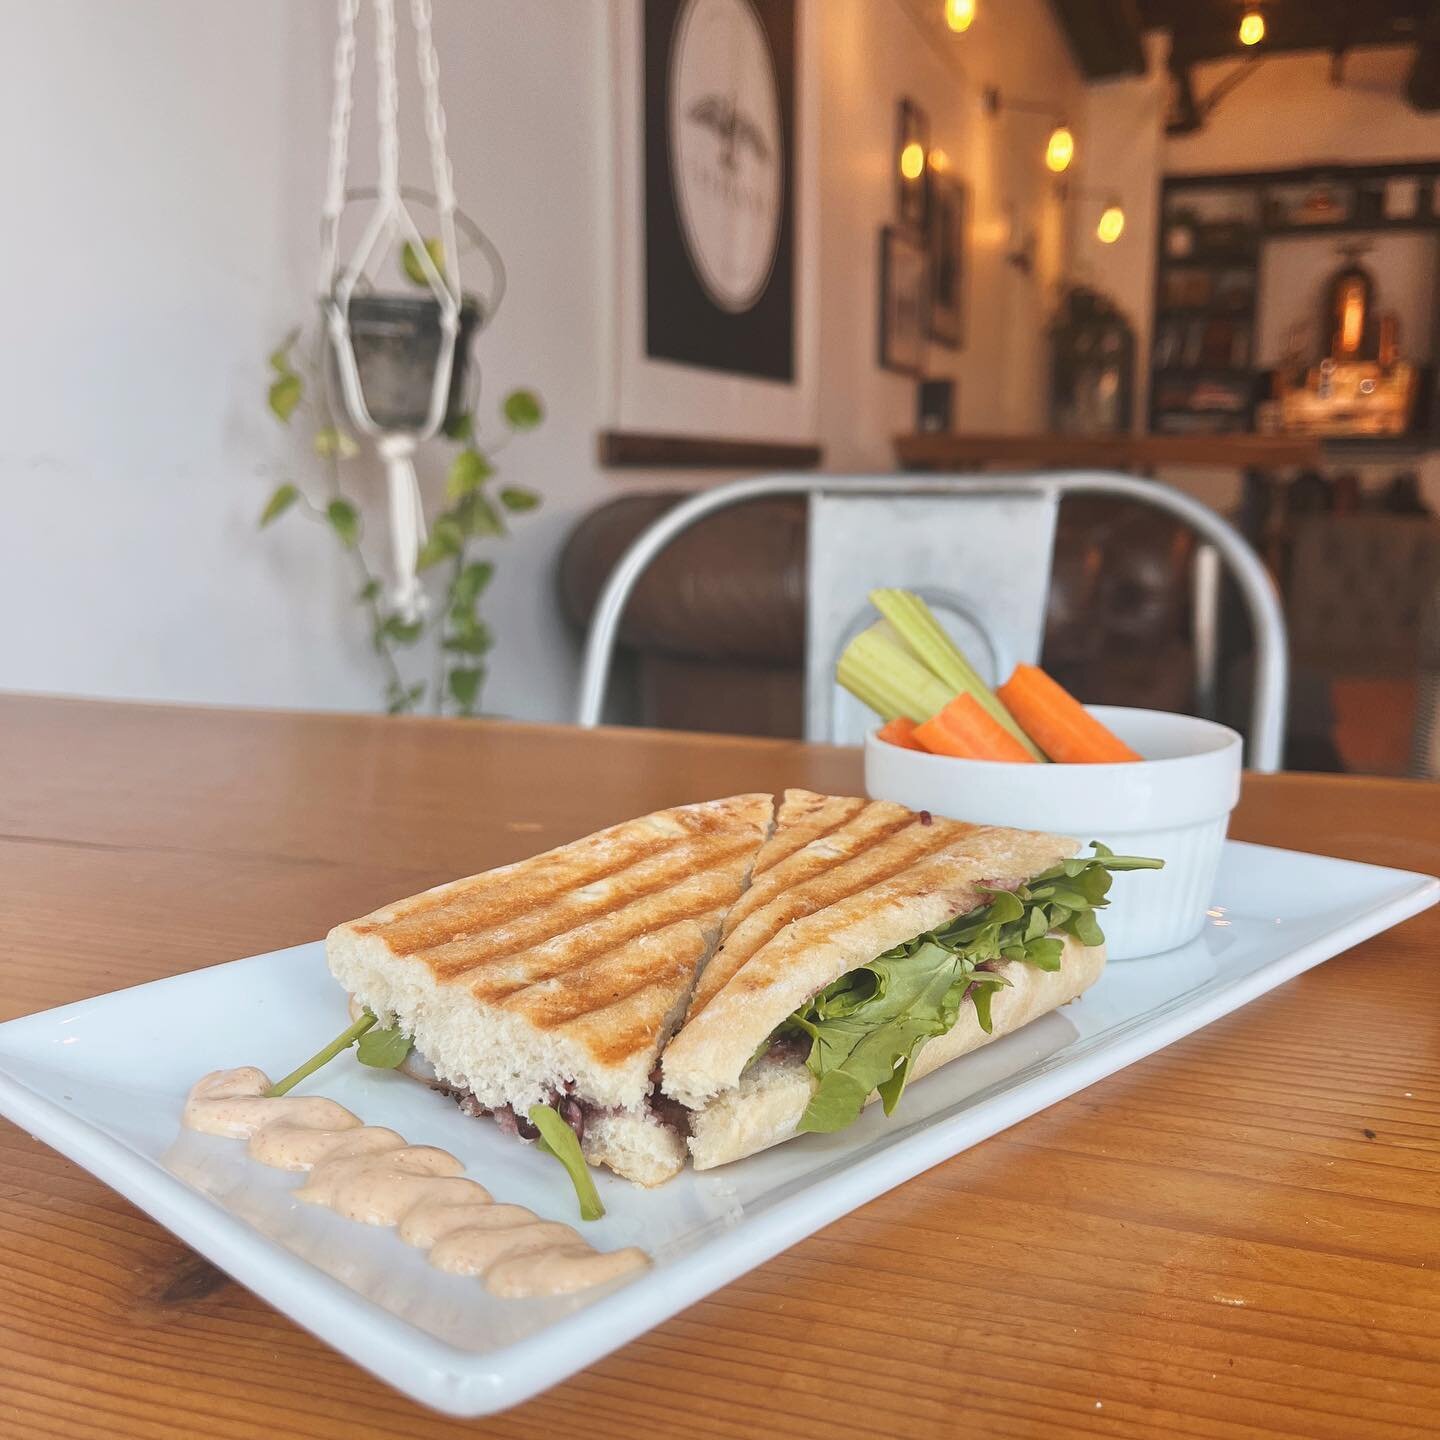 New paninis! We just refreshed our menu and added three new delectable paninis! 🍽️ 

Turkey Cran (pictured): tart cranberry layered with turkey, havarti and arugula. 

Tuna Melt: a flavourful homemade tuna salad topped with arugula, house pickled on